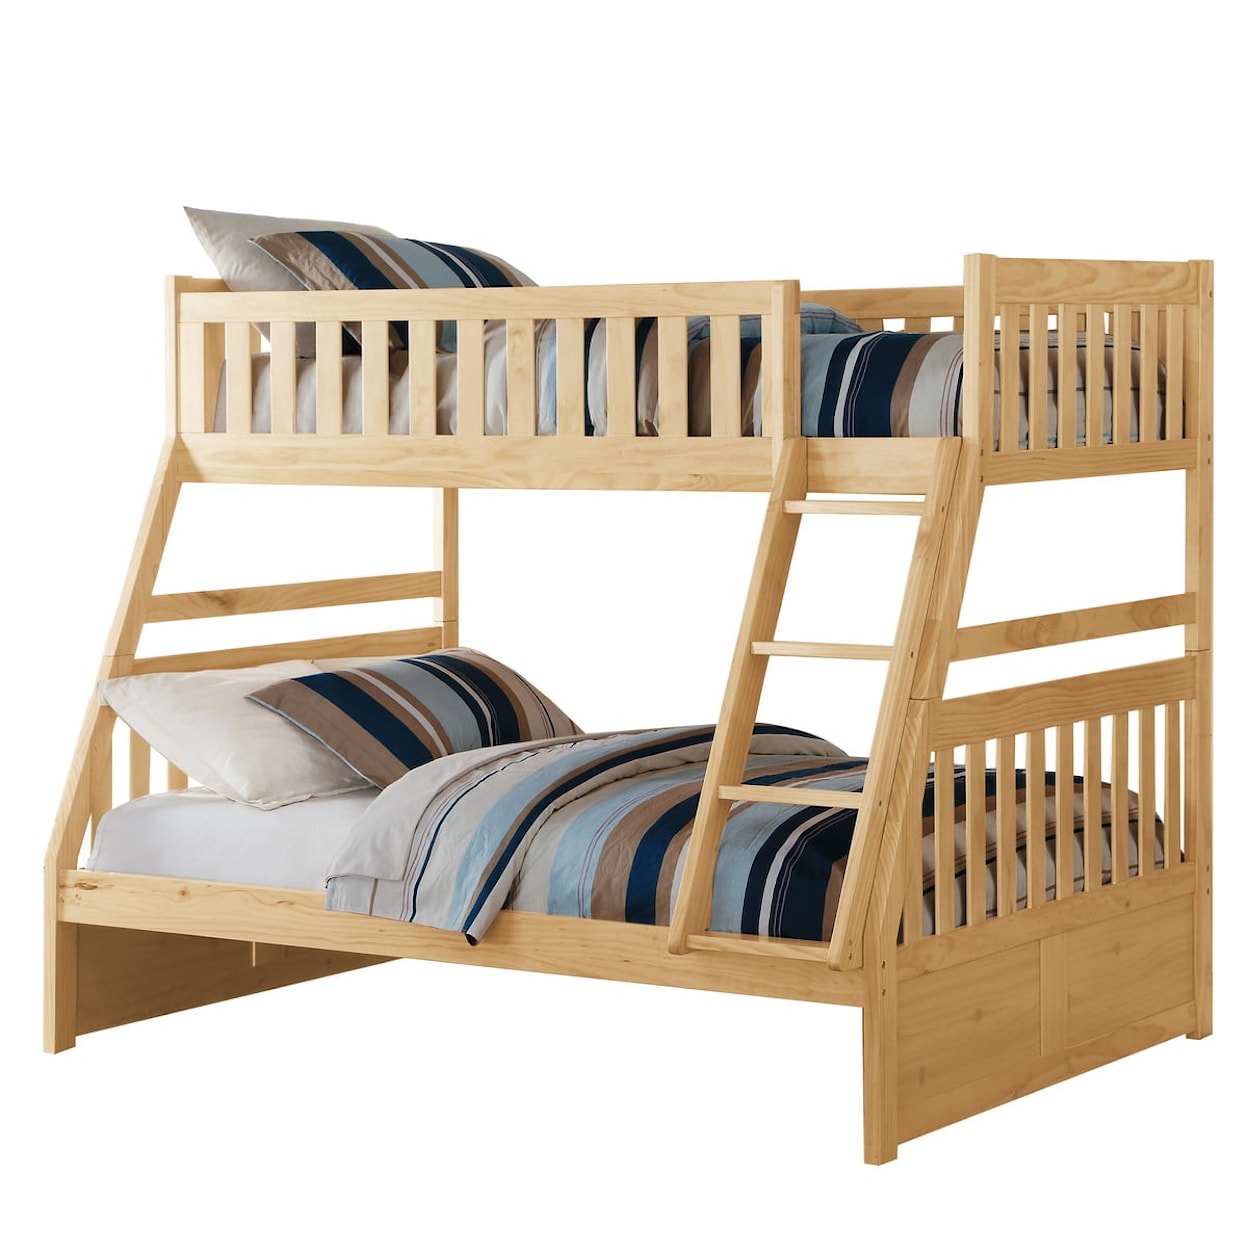 Homelegance Bartly Twin/Full Bunk Bed